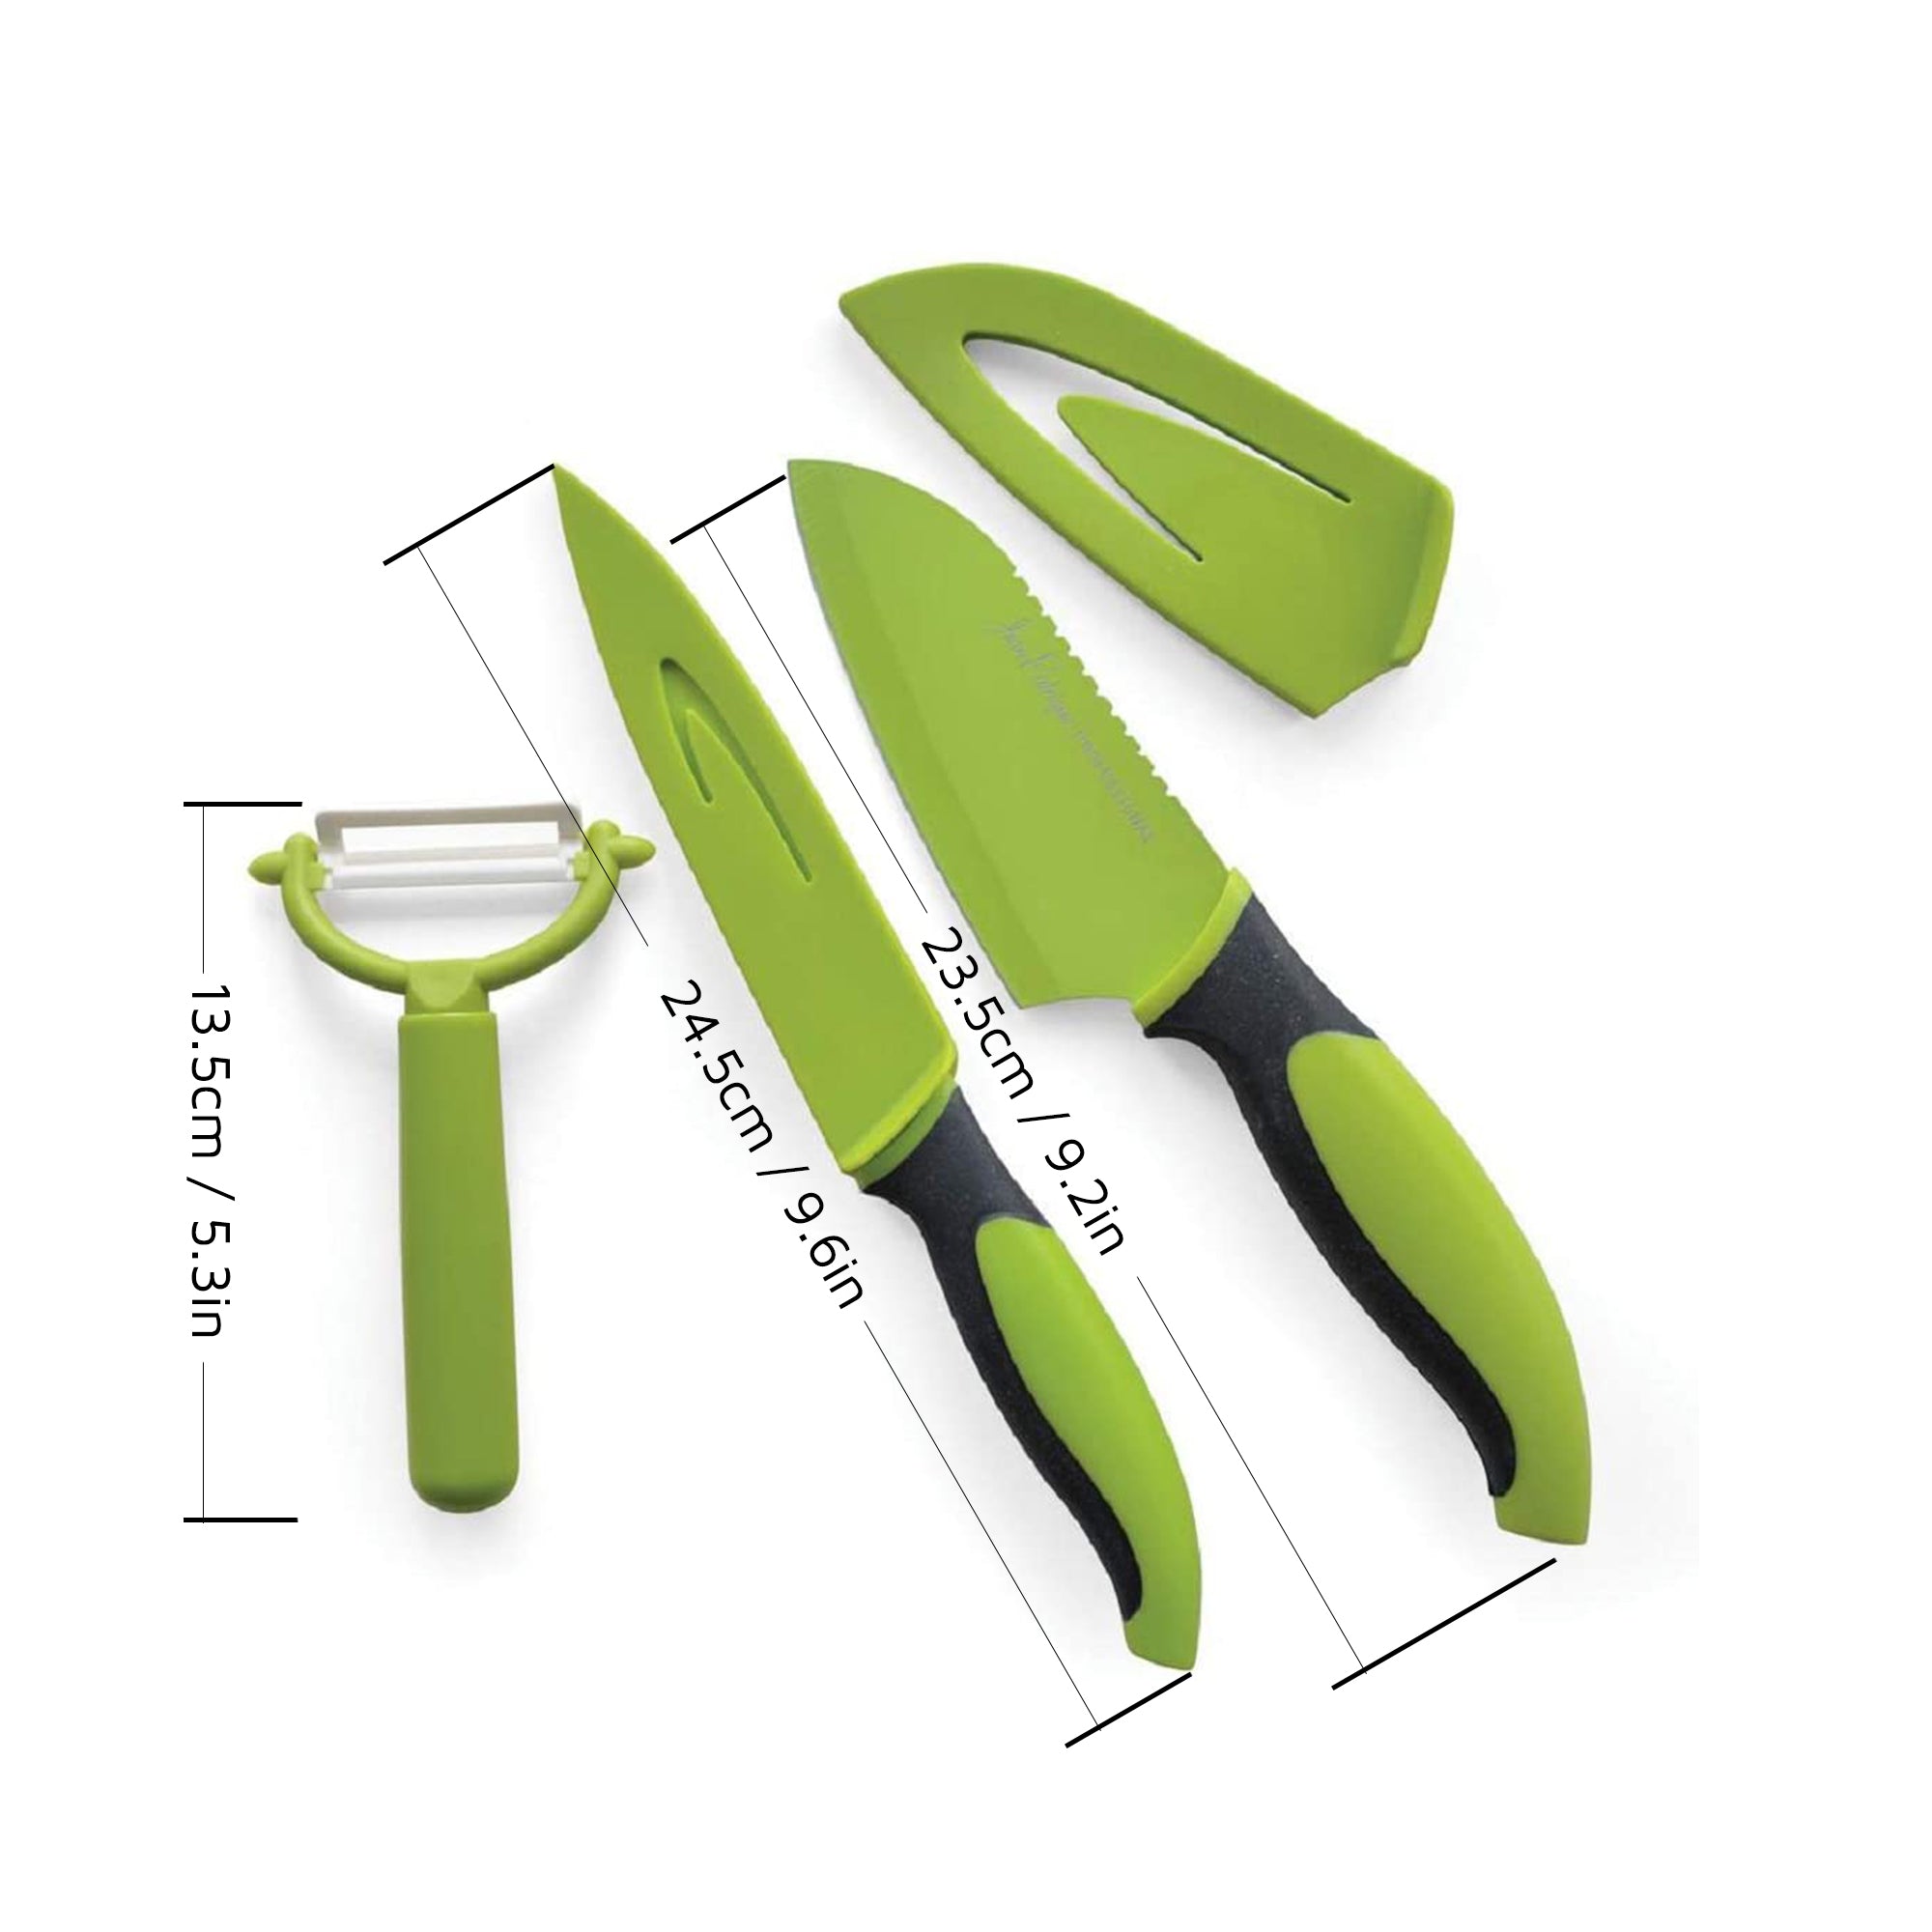 3-Piece Non-Stick Knife Set - Midnight / Ivory – Jean Patrique Professional  Cookware